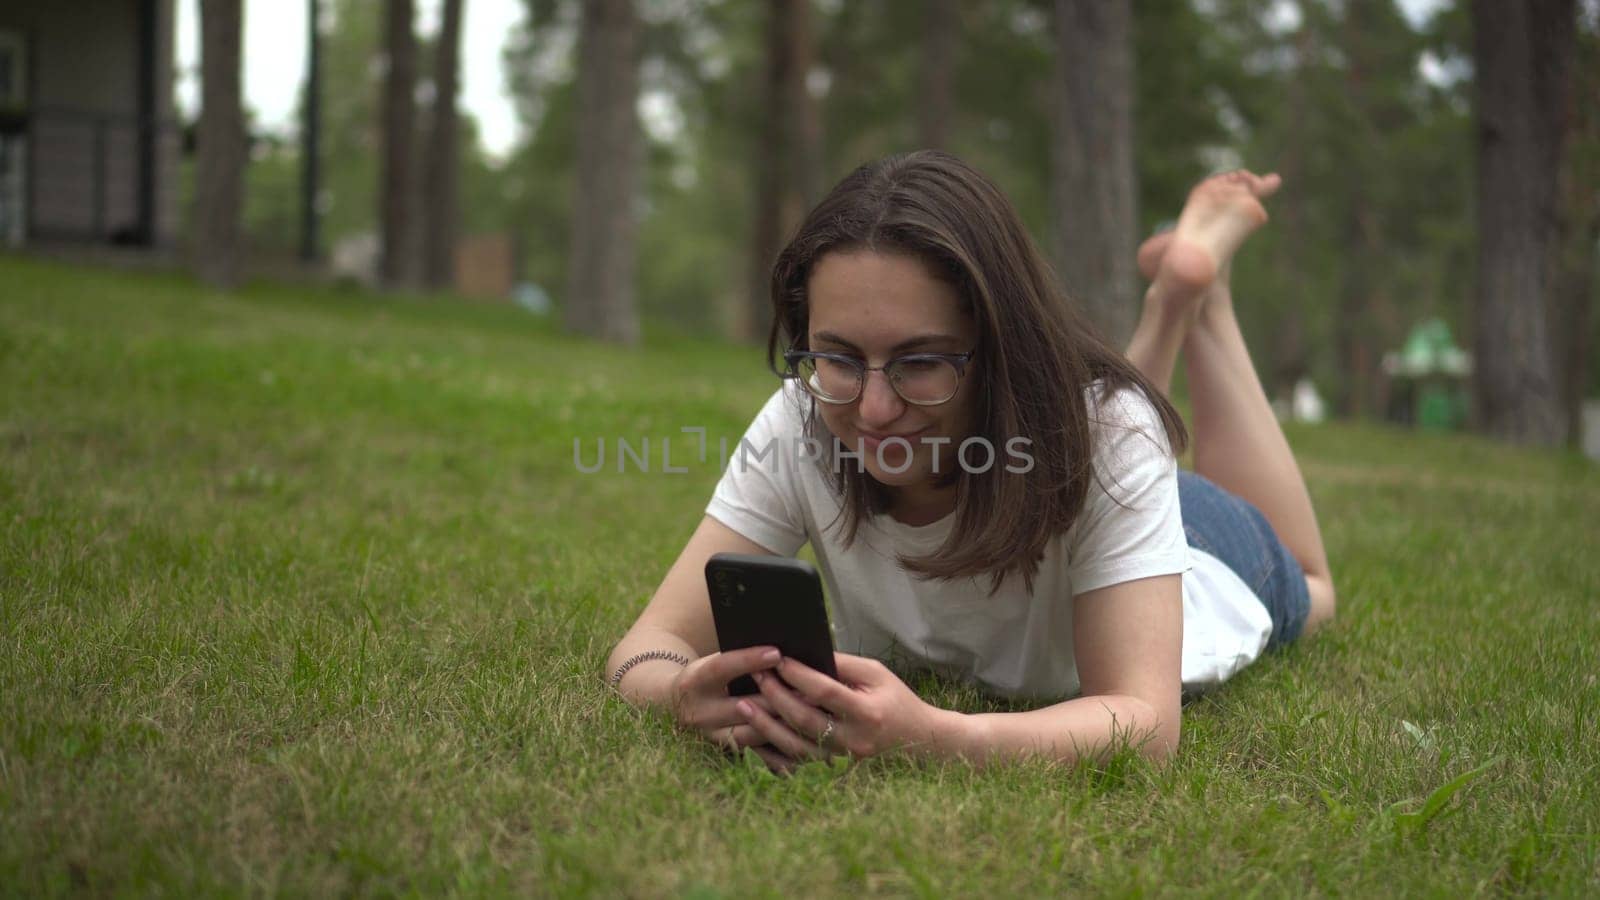 A young woman lies on the grass and chats on a smartphone. A girl with glasses is resting in the park with a phone. 4k